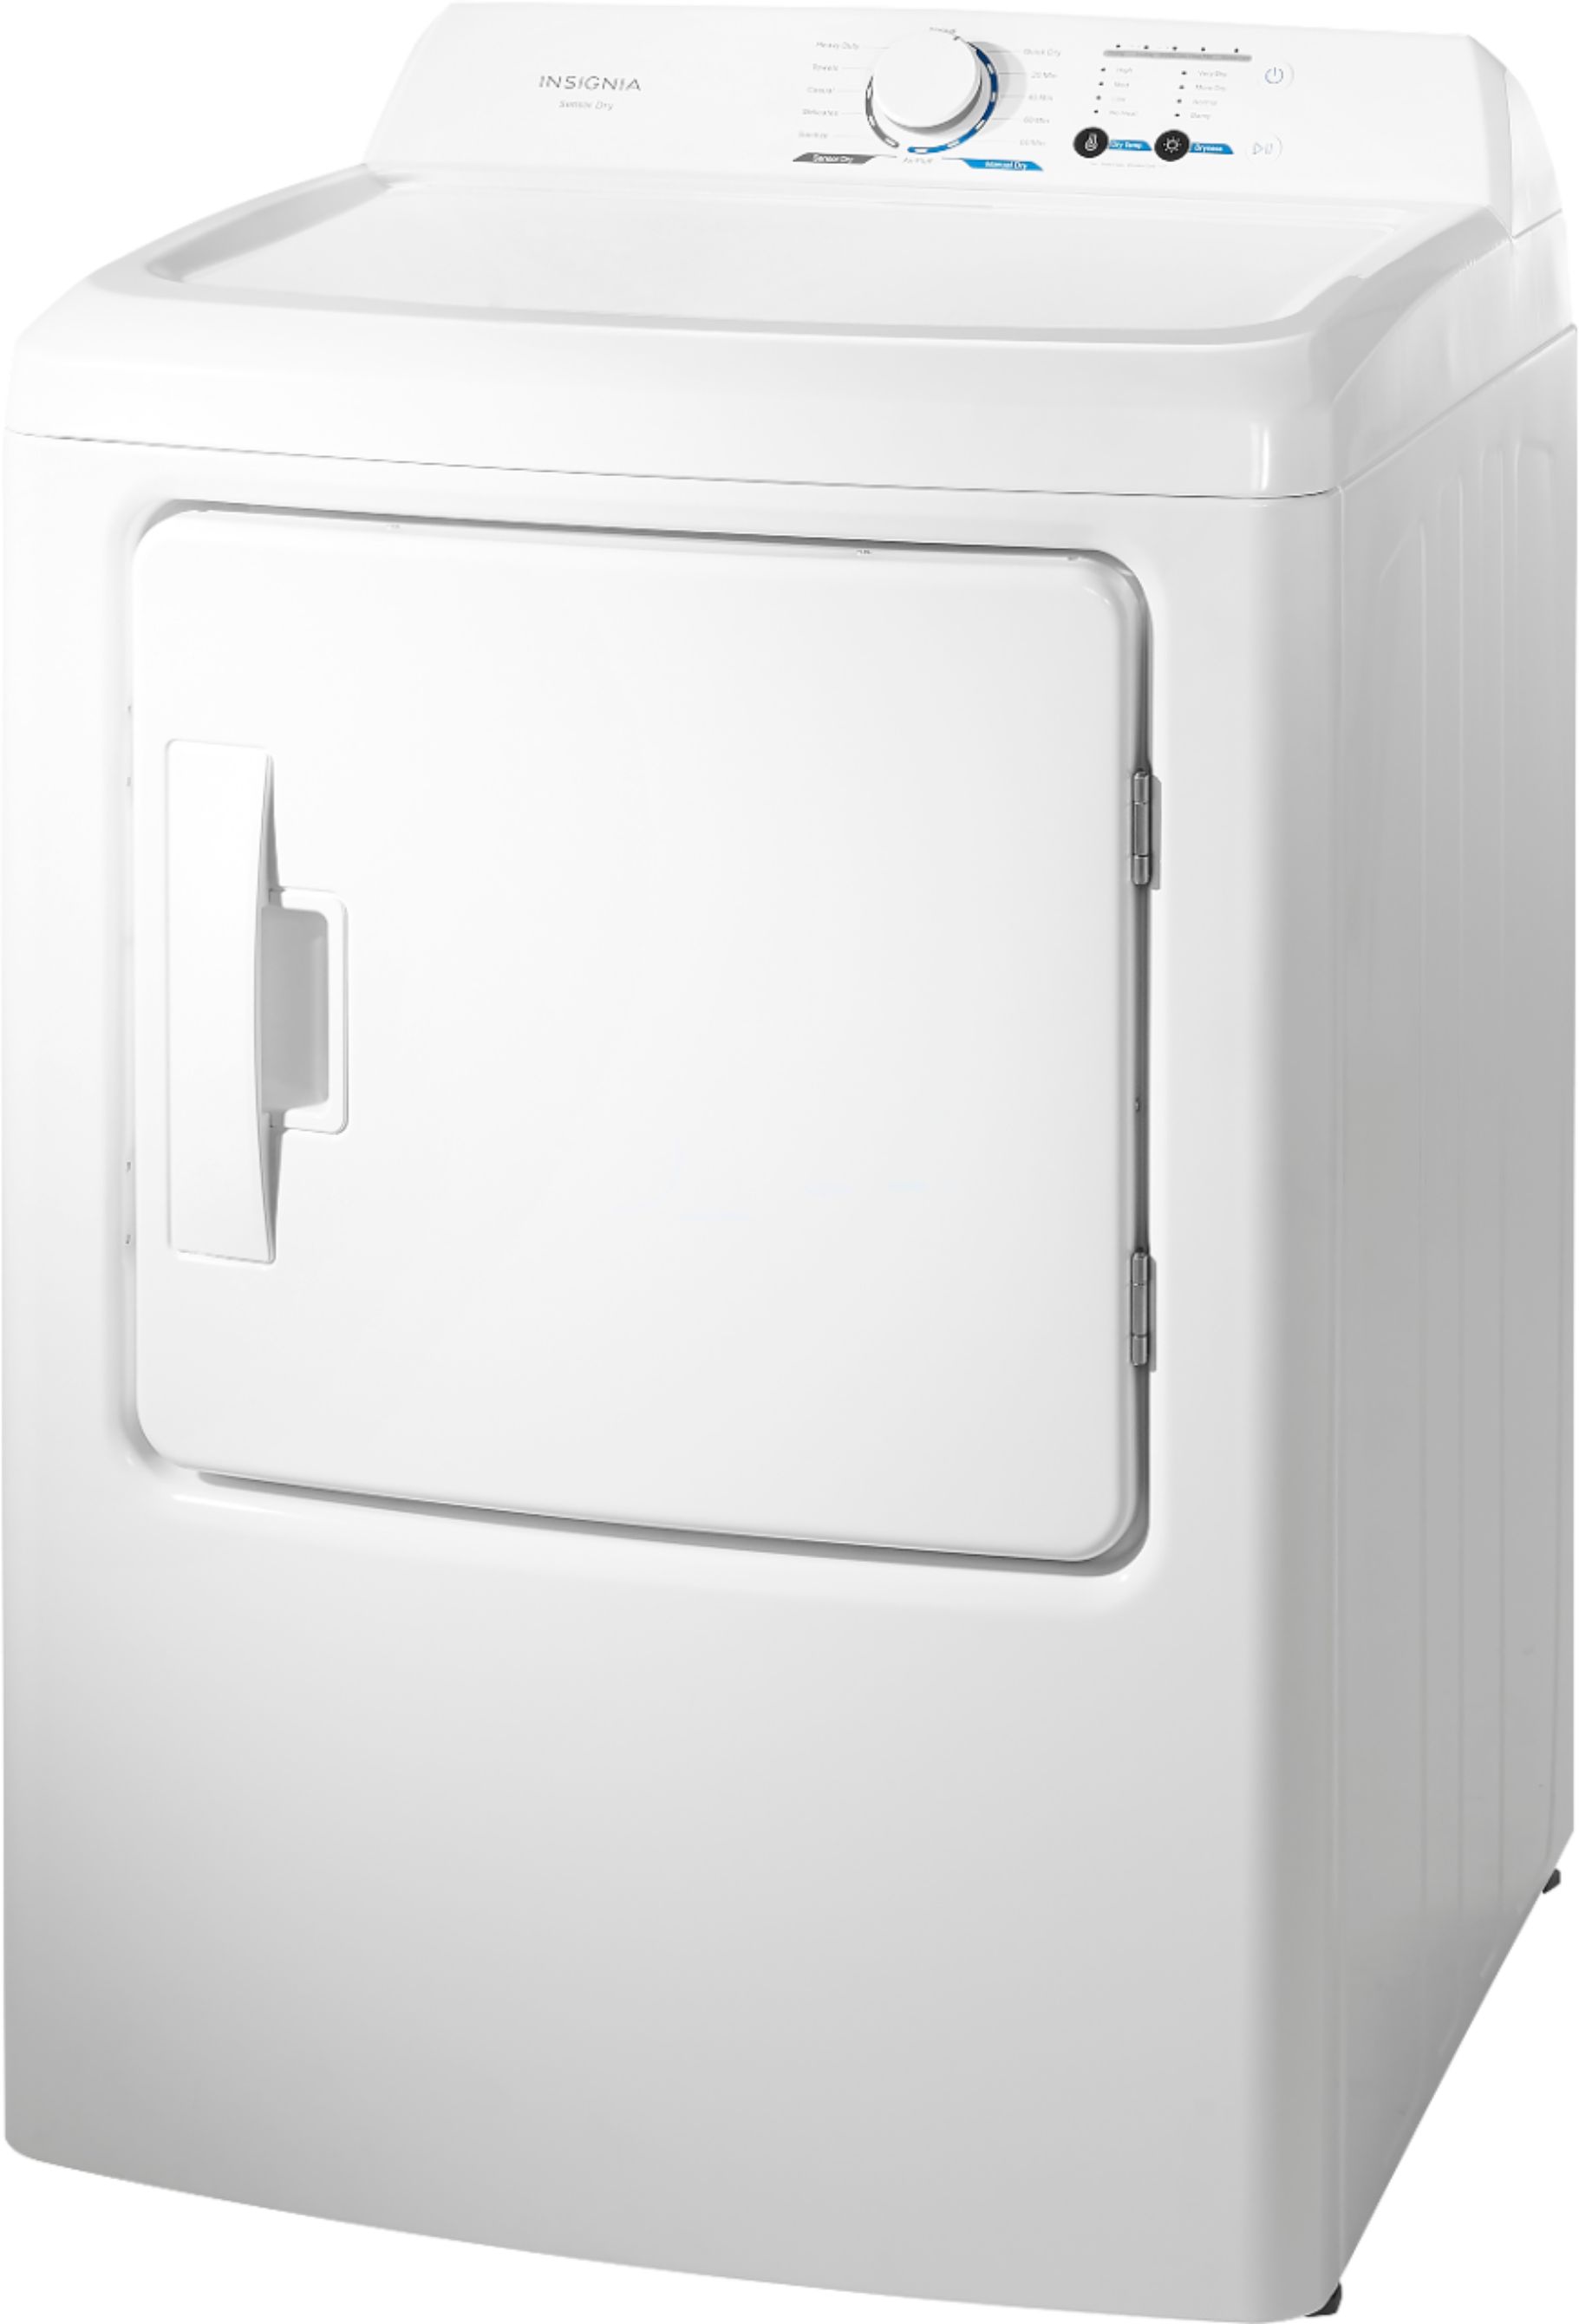 Left View: Samsung - 7.4 Cu. Ft. Electric Dryer with 10 Cycles and Sensor Dry - White